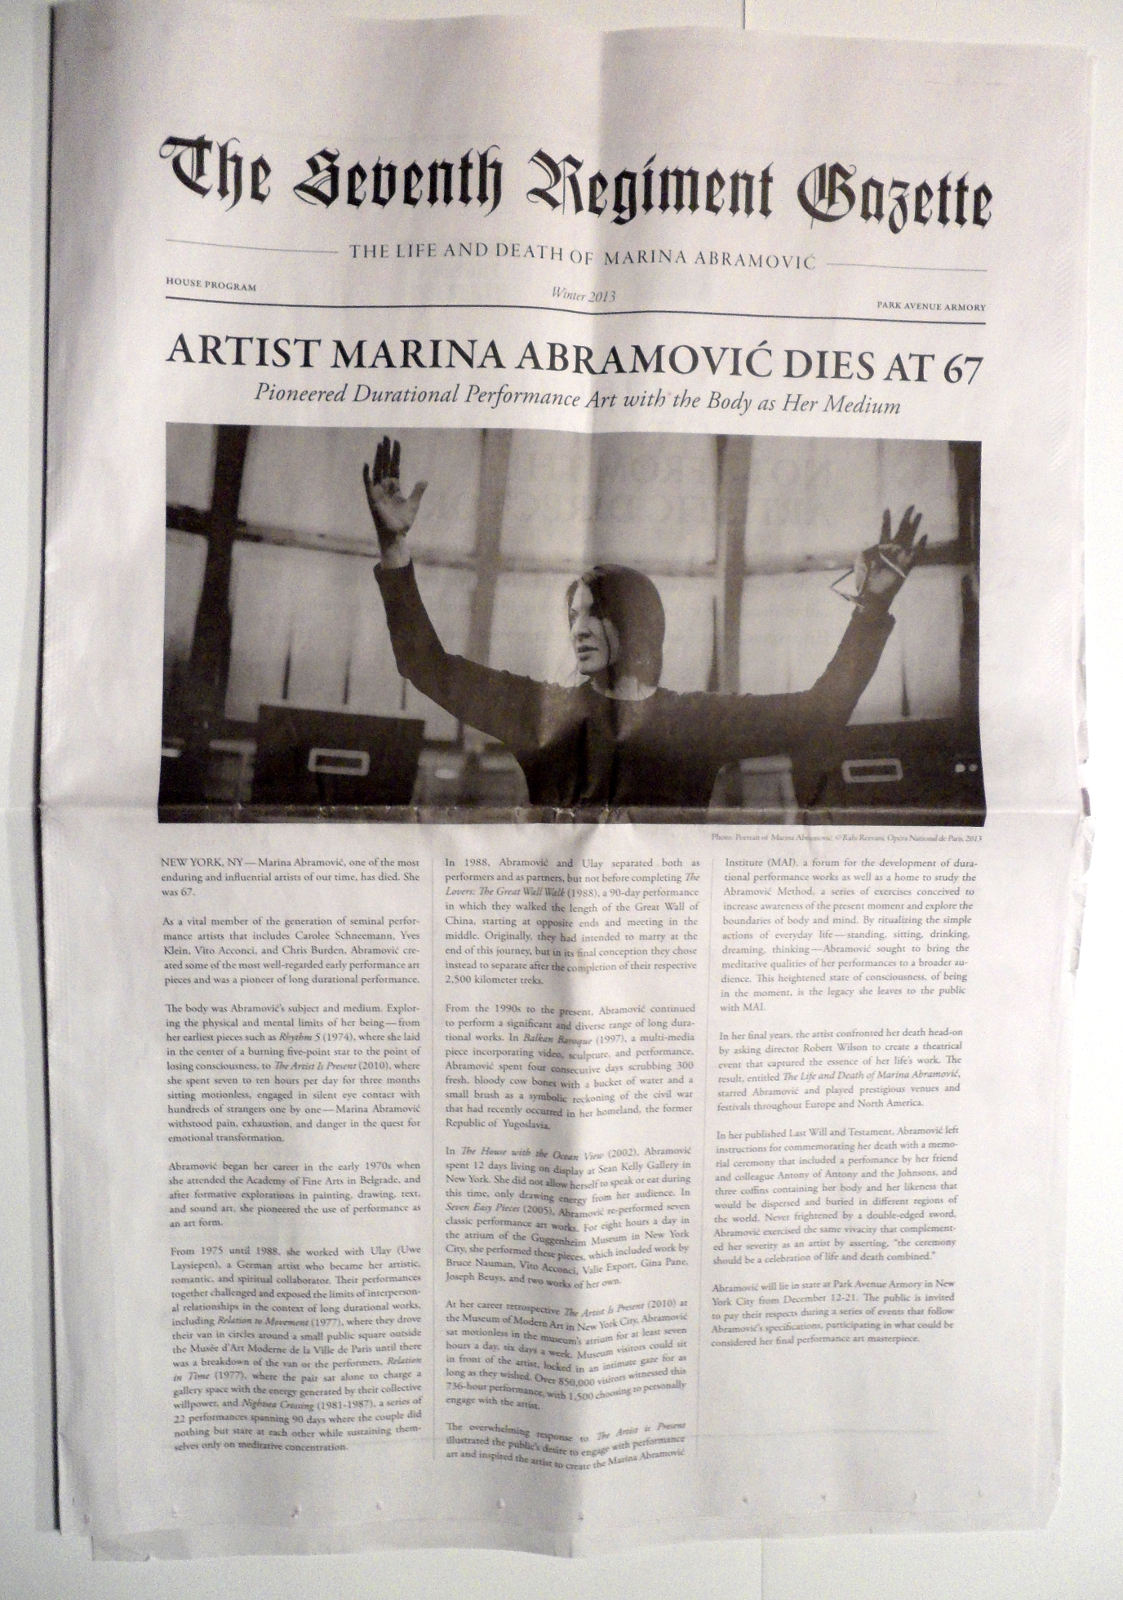 The Life and Death of Marina Abramovic a New York